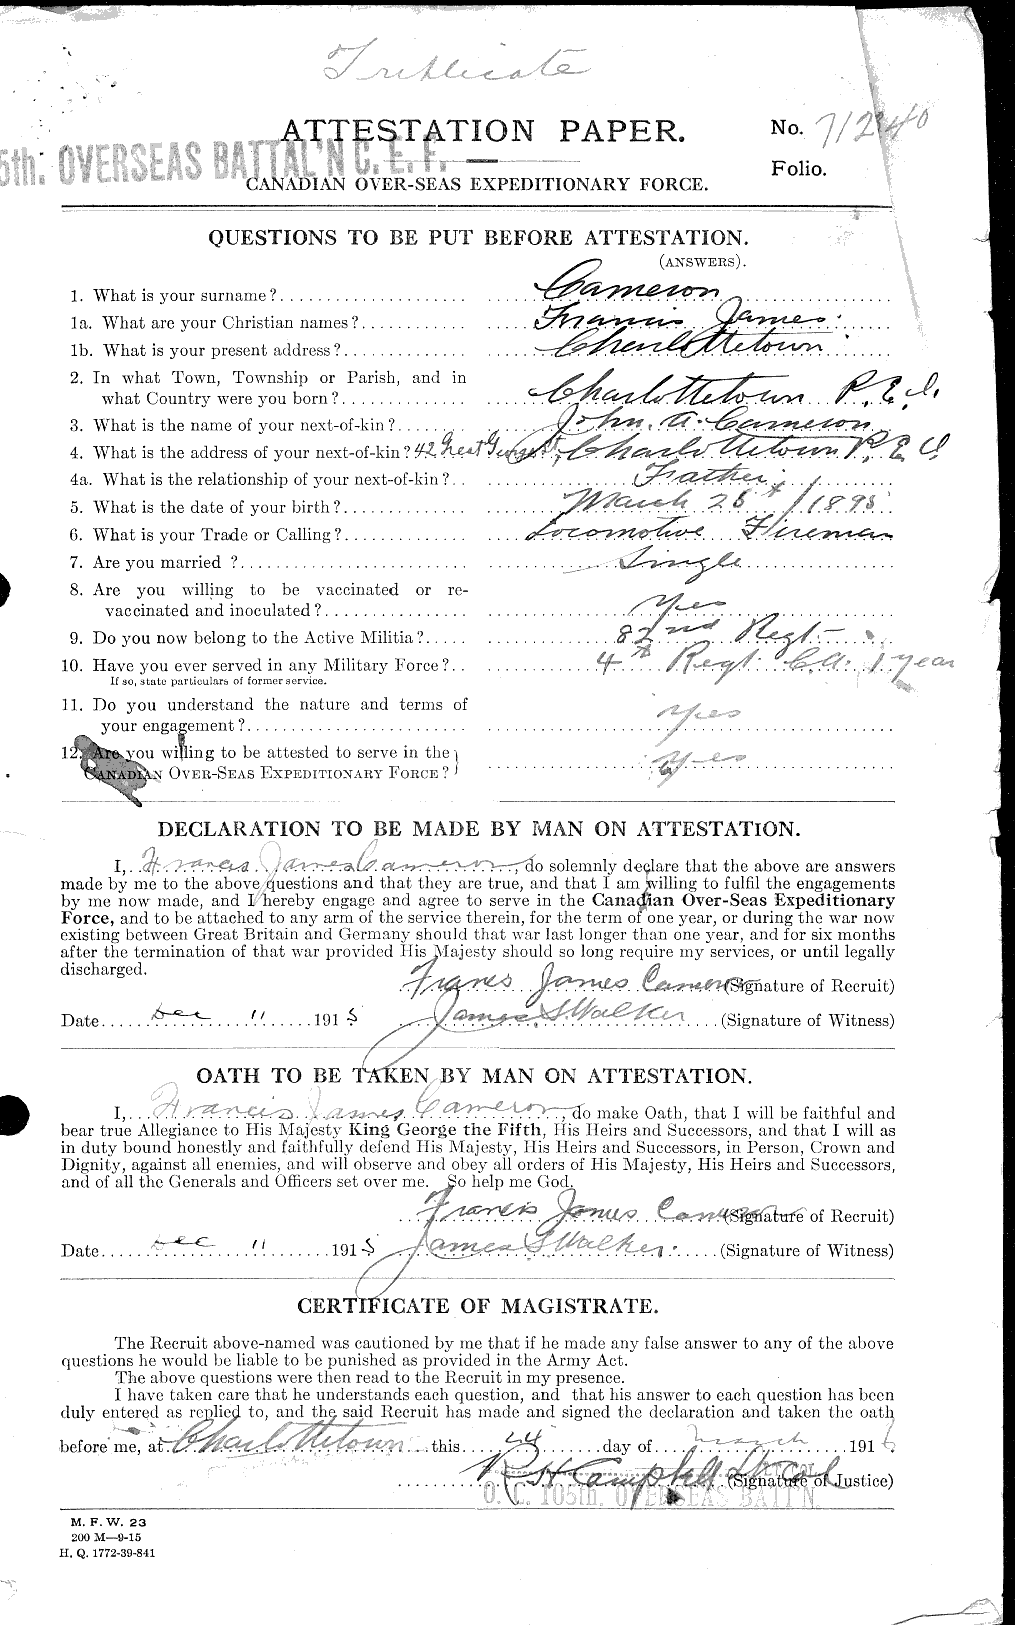 Personnel Records of the First World War - CEF 006550a